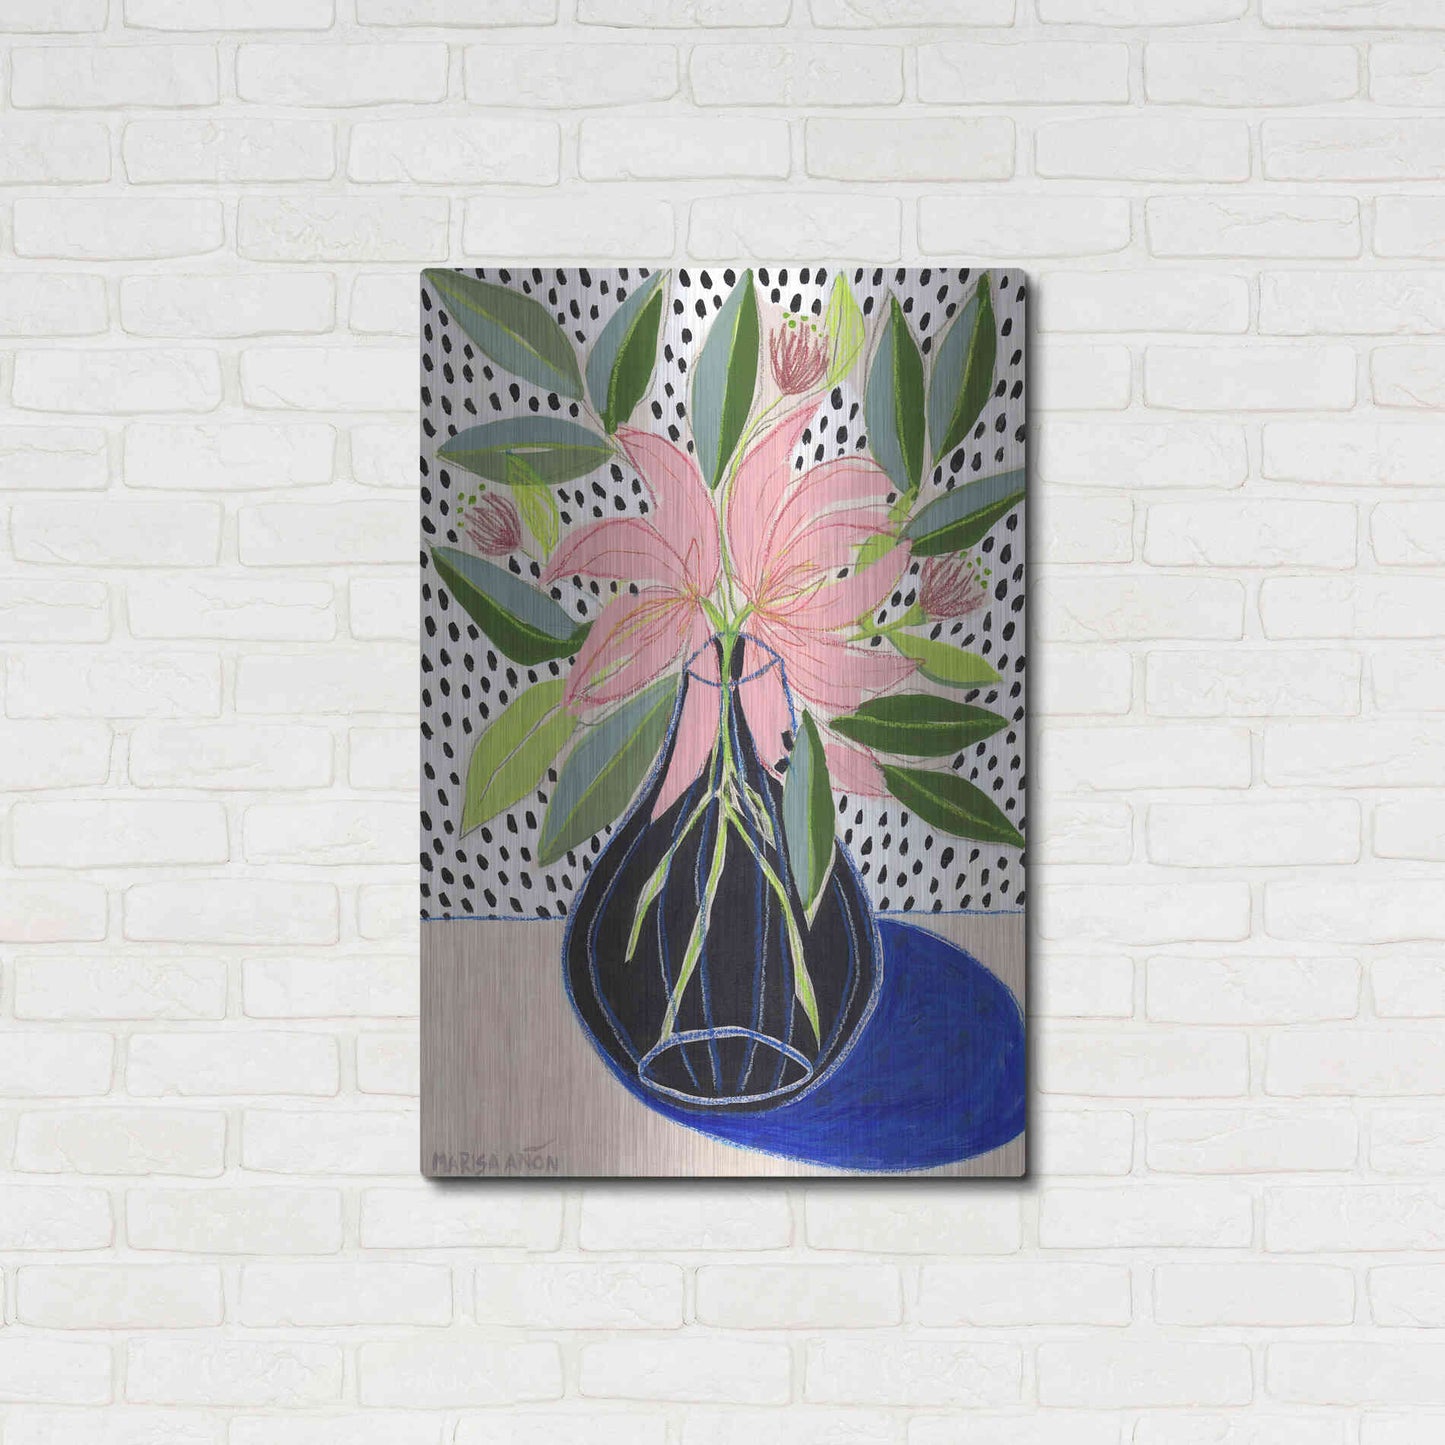 Luxe Metal Art 'Spring Florals 7' by Marisa Anon, Metal Wall Art,24x36